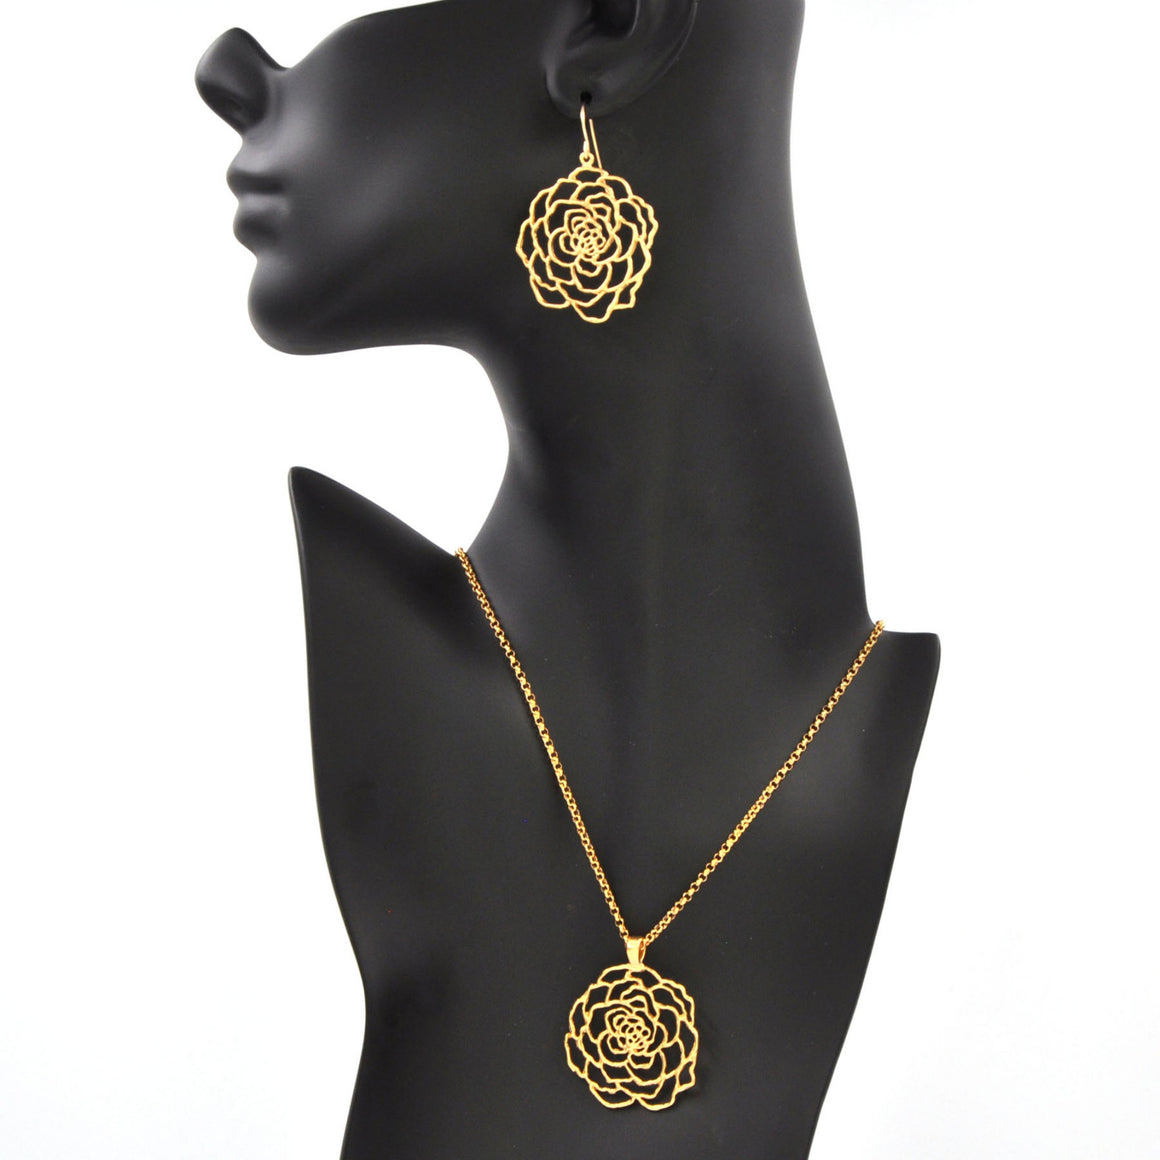 Rose Pendant Necklace - 24K Gold Plated